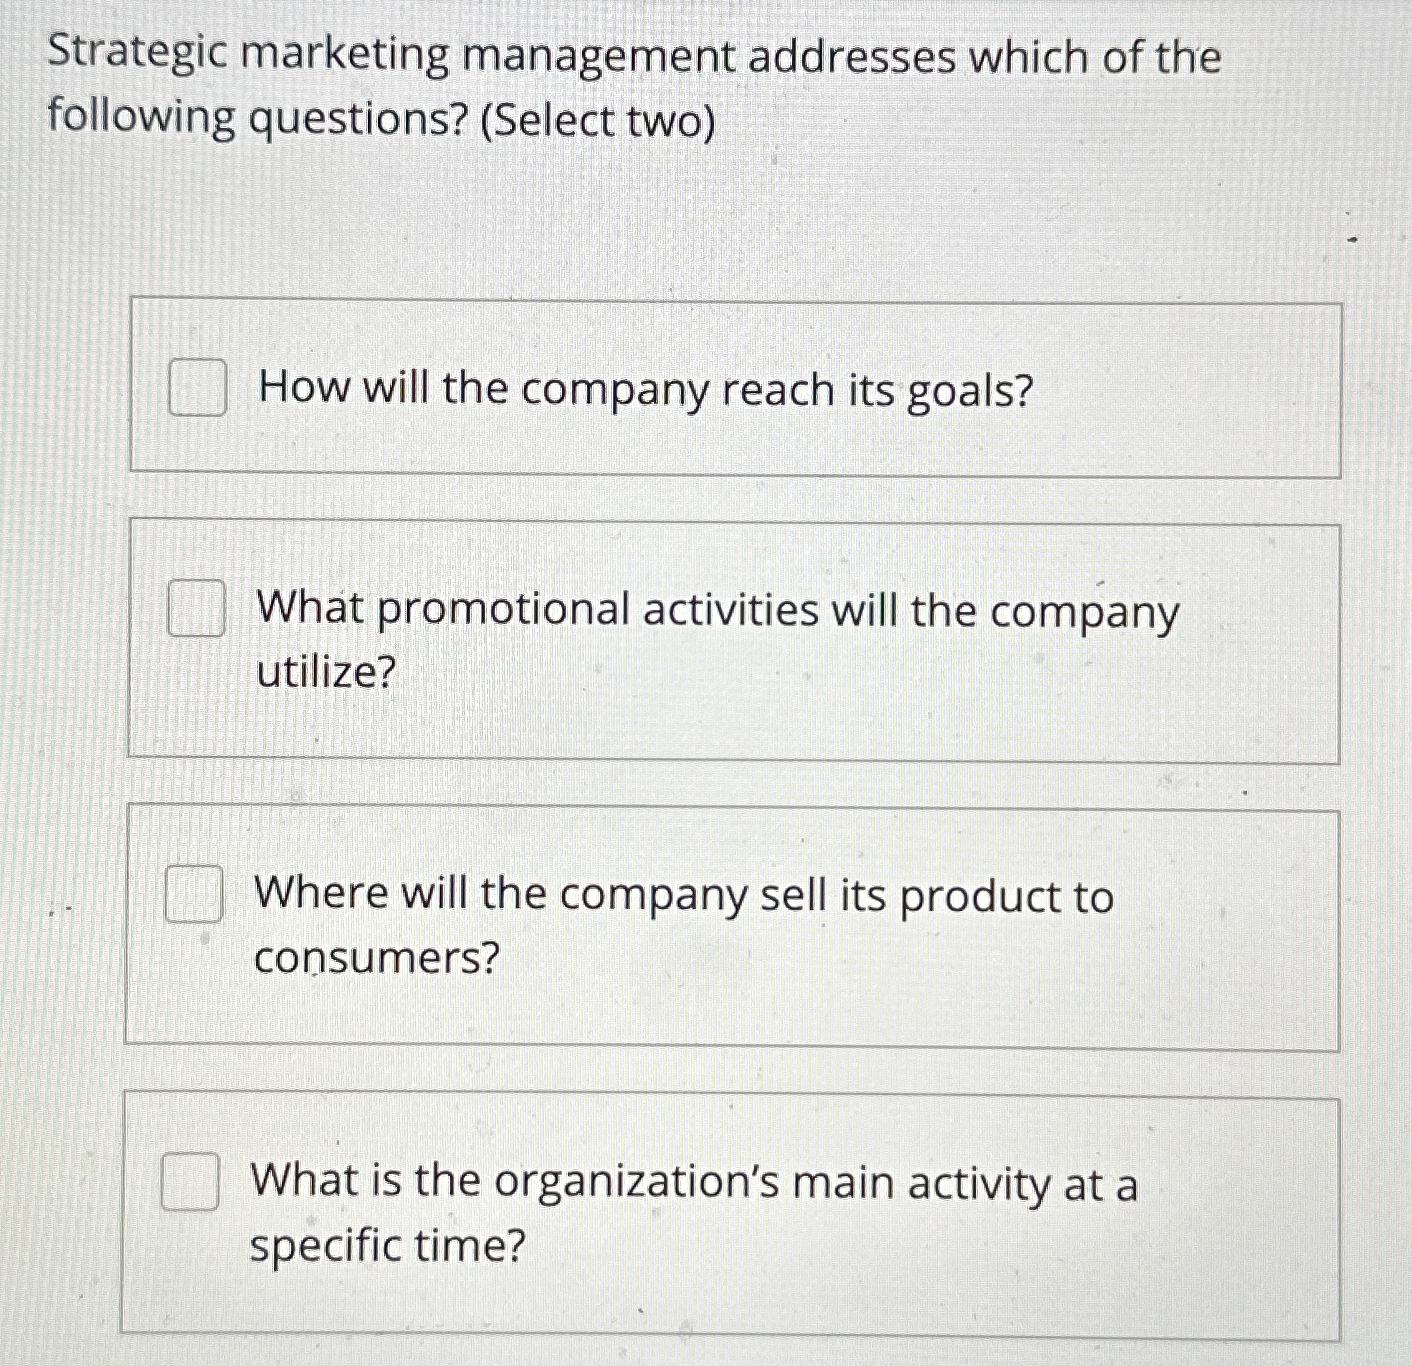 Strategic Marketing Management Addresses Which of the Following Questions? (Select Two)  : Uncover Insights